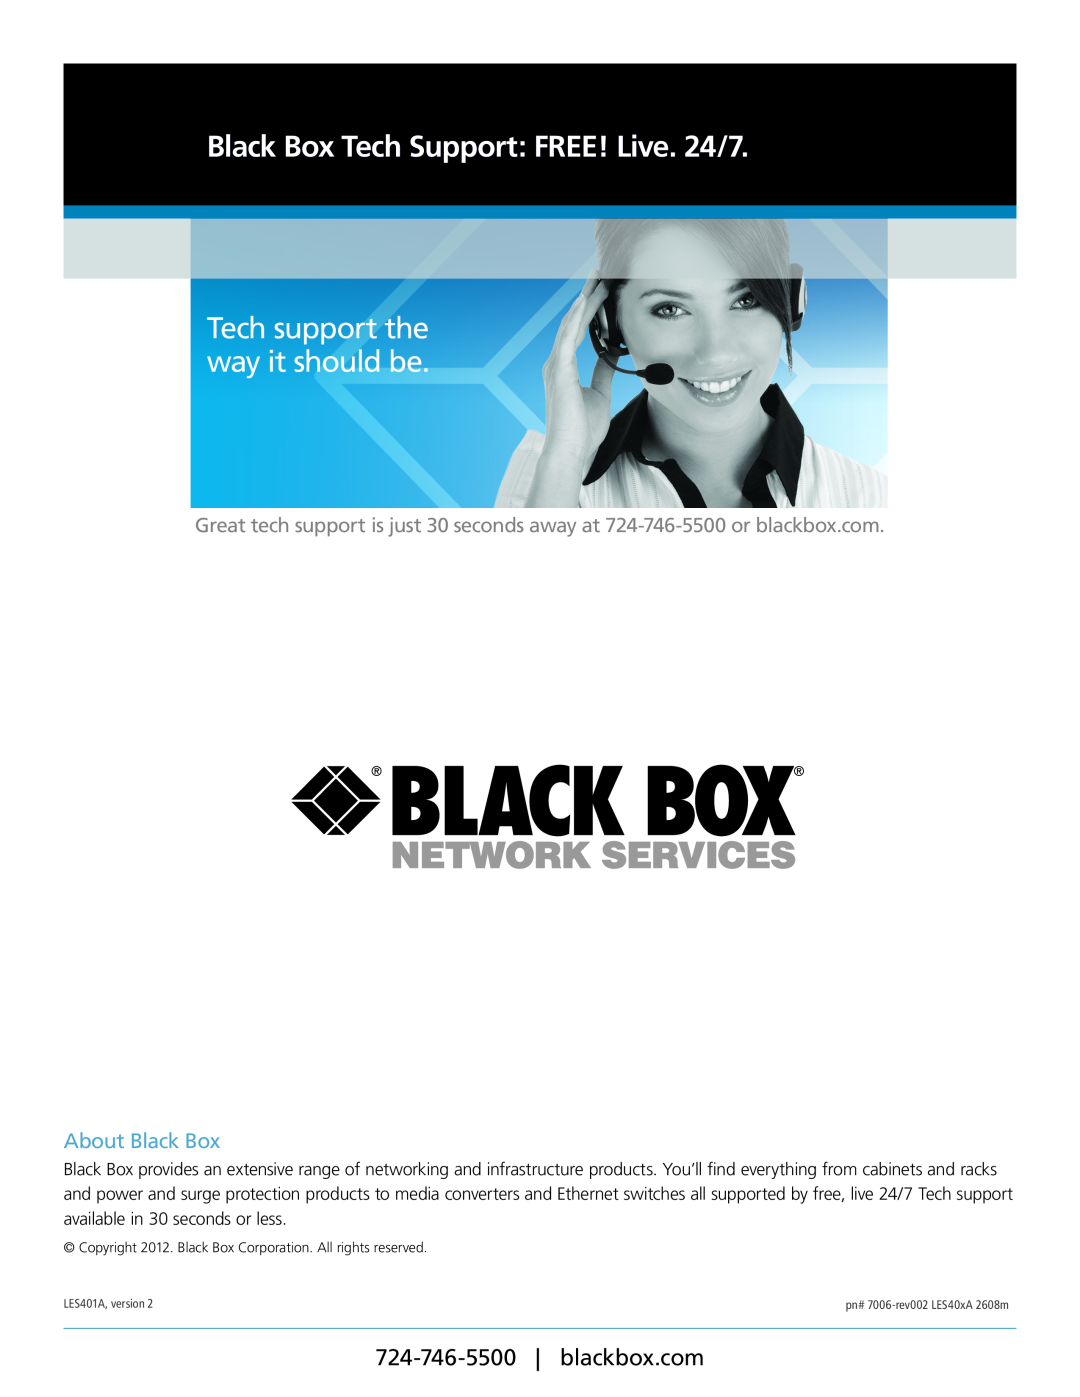 Black Box LES402A, LES404A Black Box Tech Support FREE! Live. 24/7, Tech support the way it should be, About Black Box 